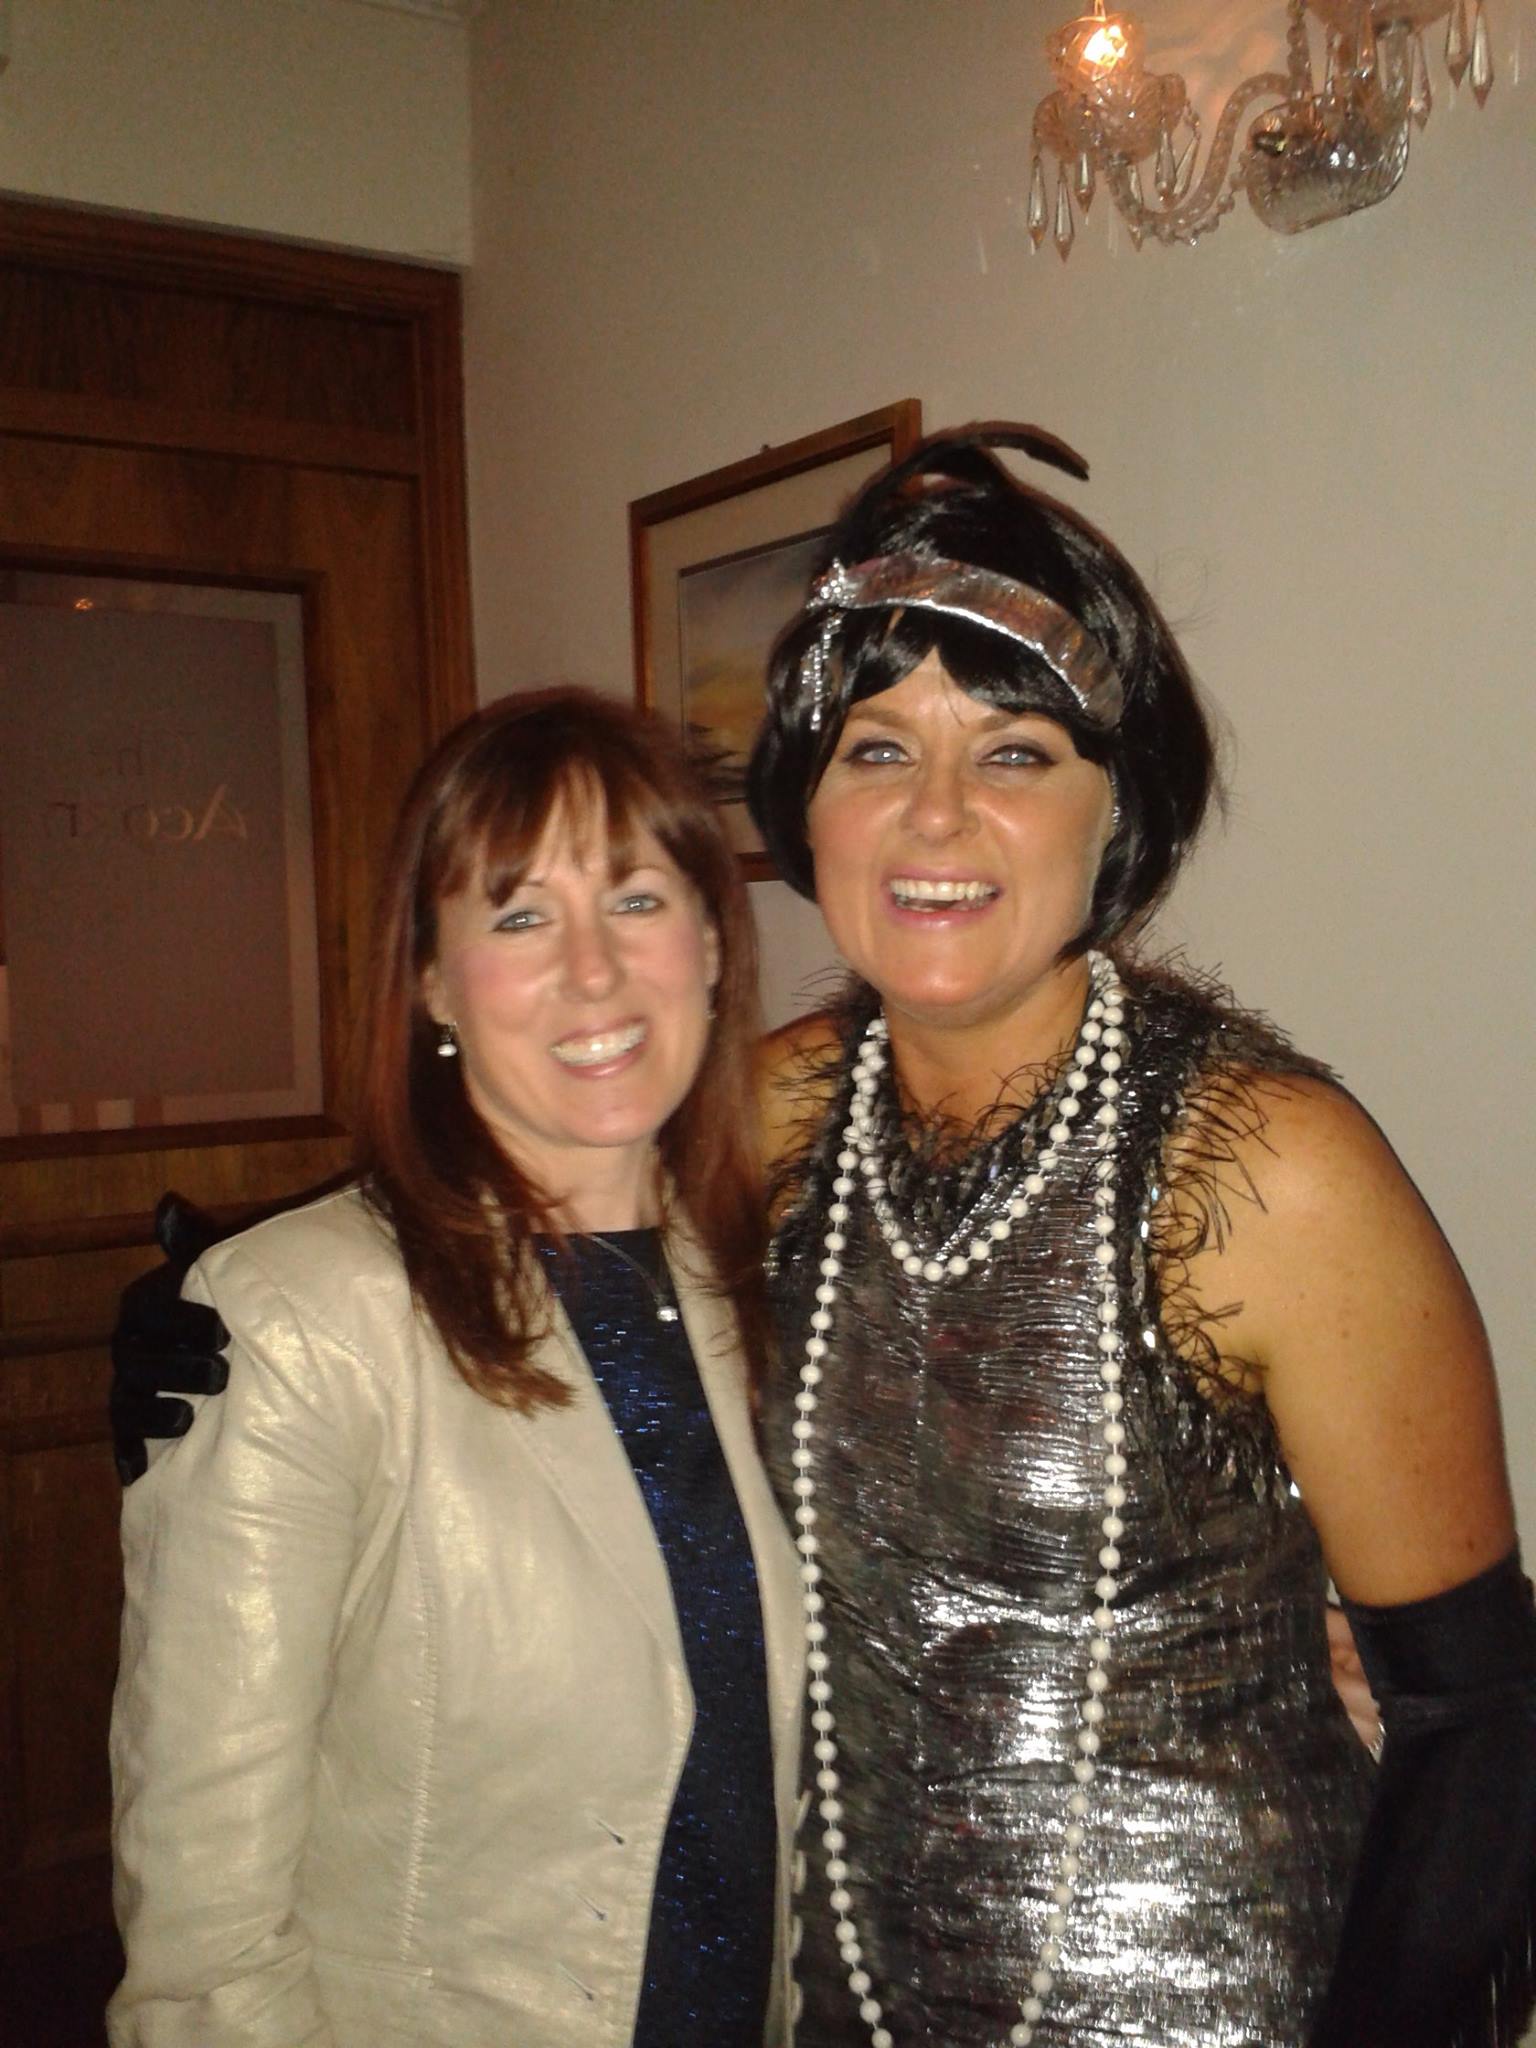 Cllr. Liona O'Toole with Lisa Tuite at Lucan Sarsfields "Strictly" Fundraiser